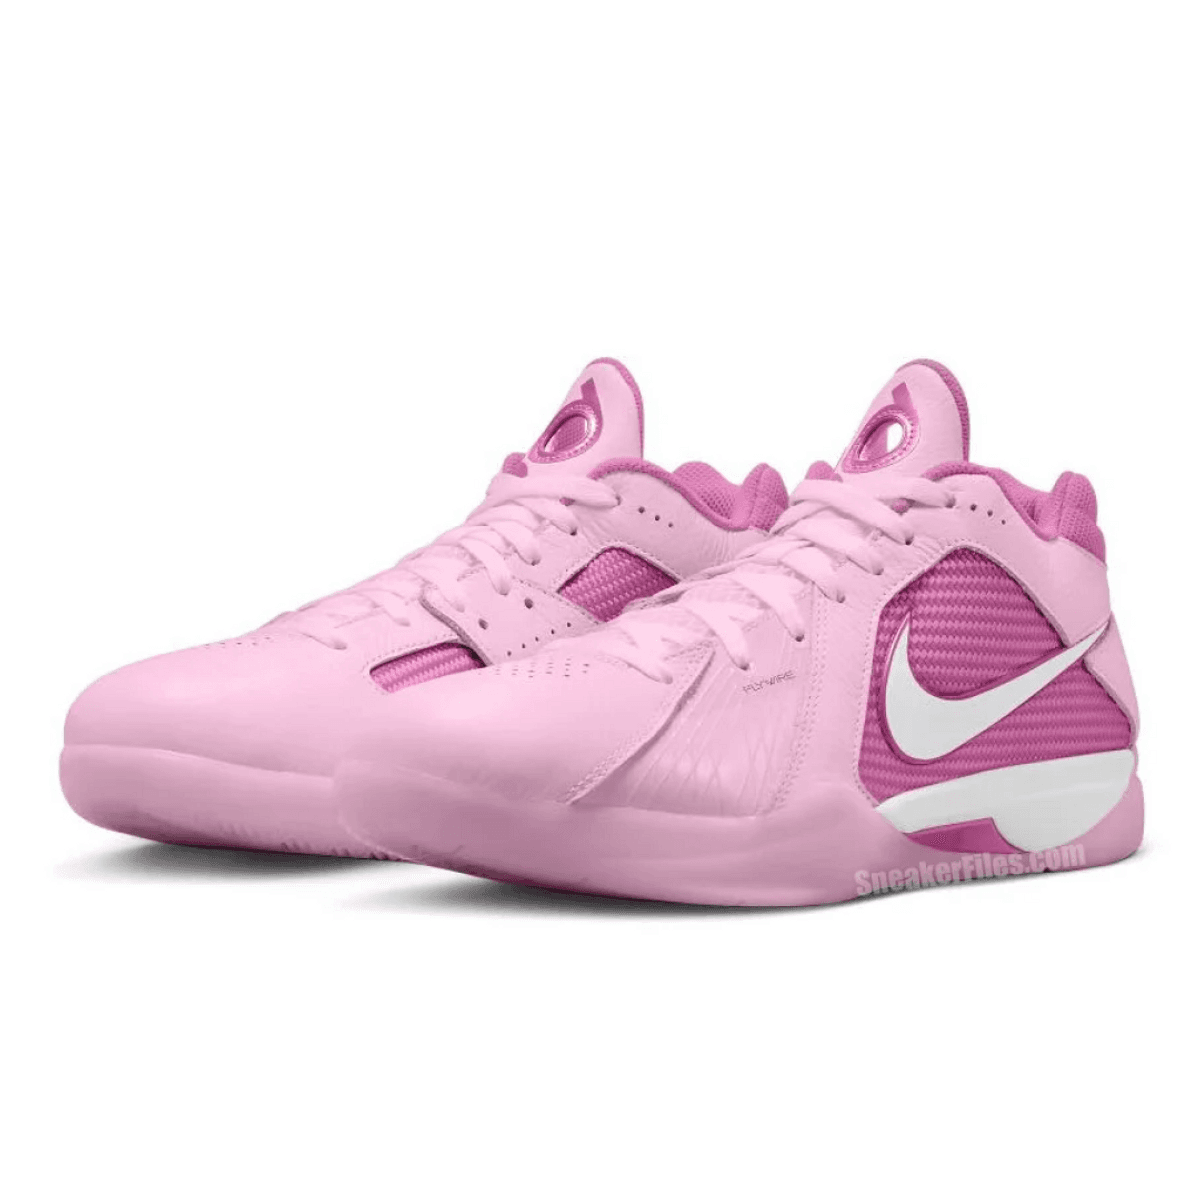 The Nike KD 3 Aunt Pearl Raises Awareness For Breast Cancer